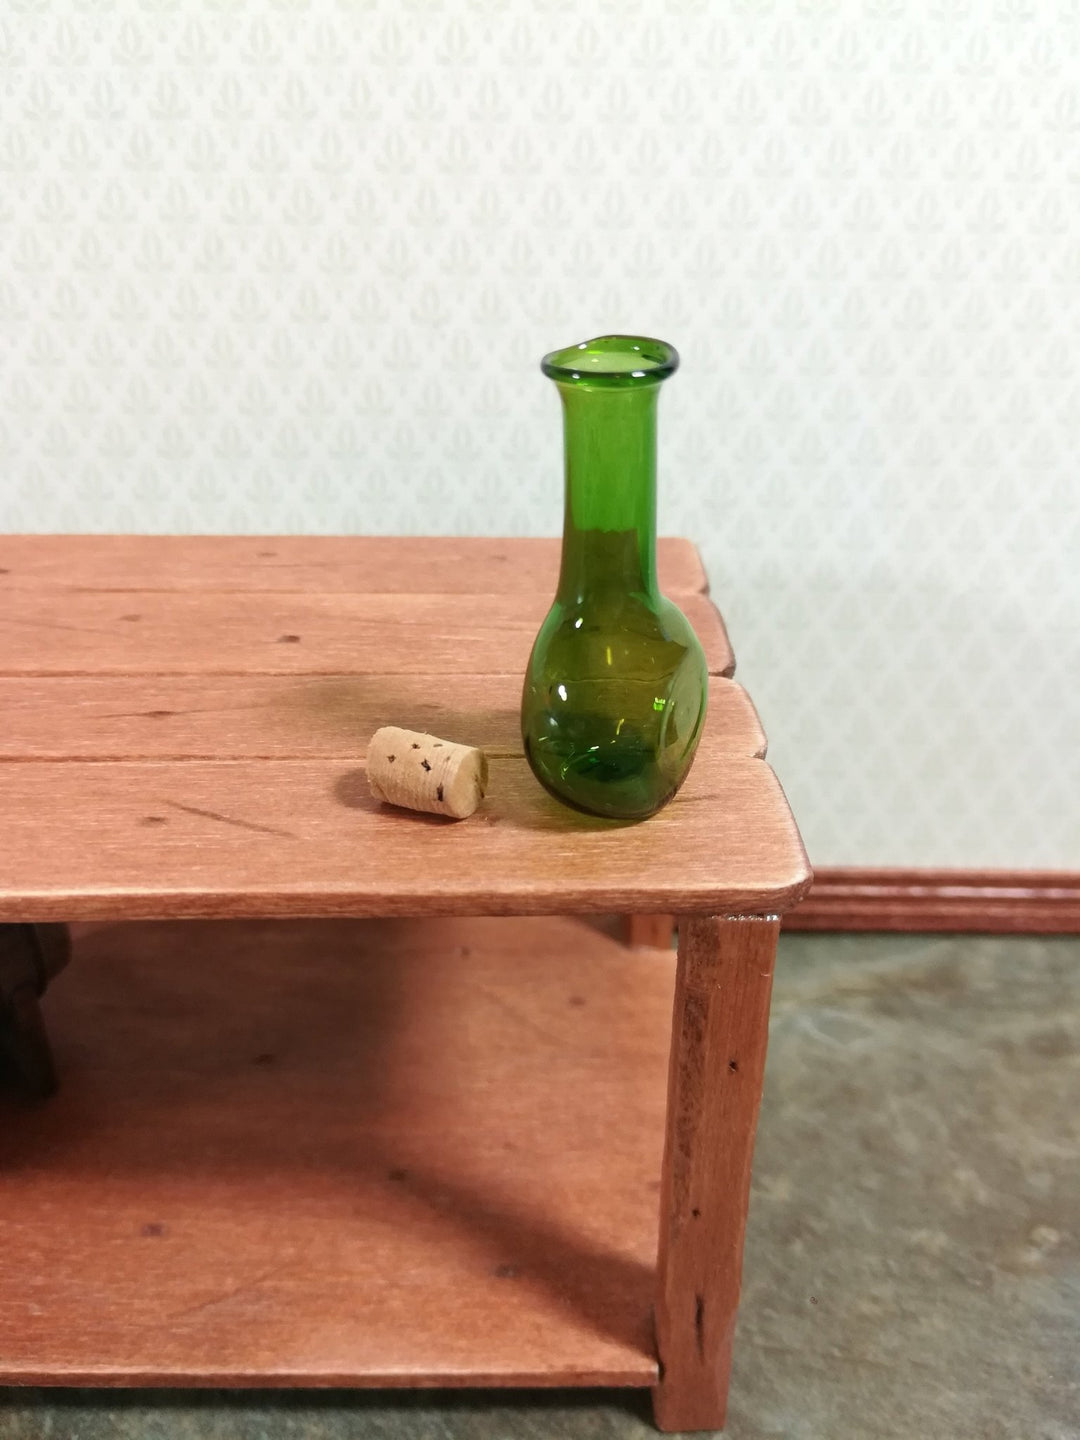 Dollhouse Miniature Glass Bottle Wine Decanter Large Green Corked 1:12 Scale - Miniature Crush